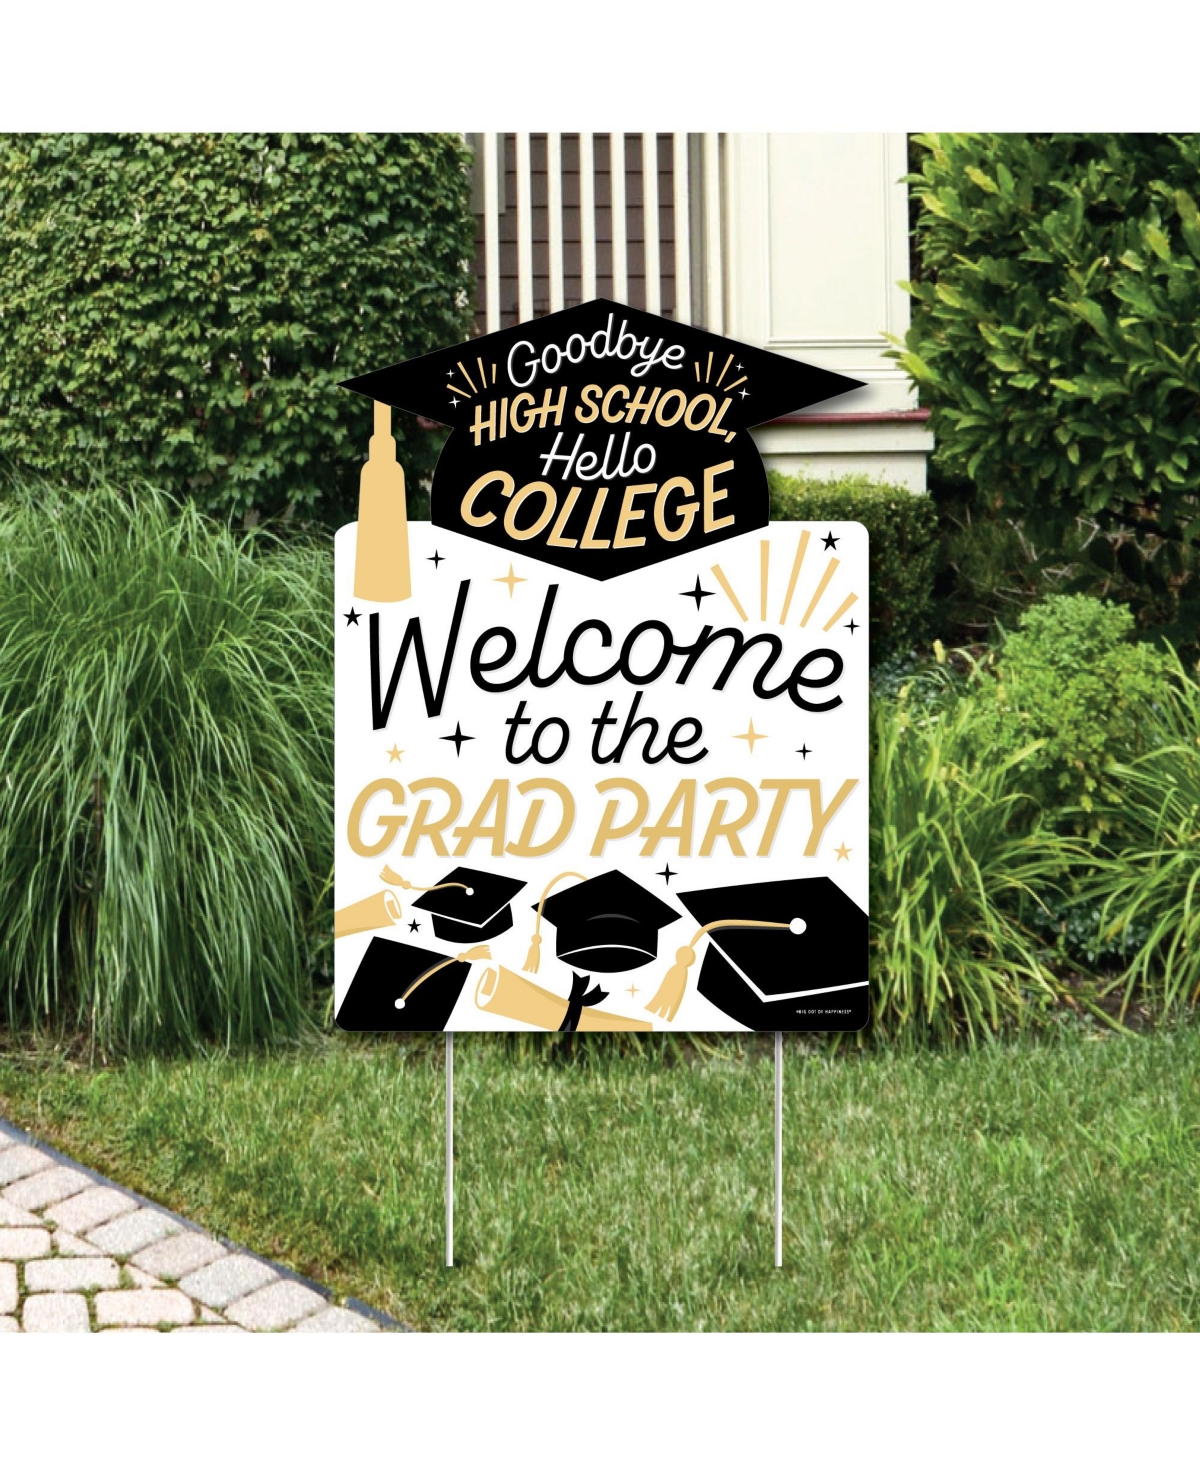 Goodbye High School, Hello College - Decor Graduation Party Welcome Yard Sign